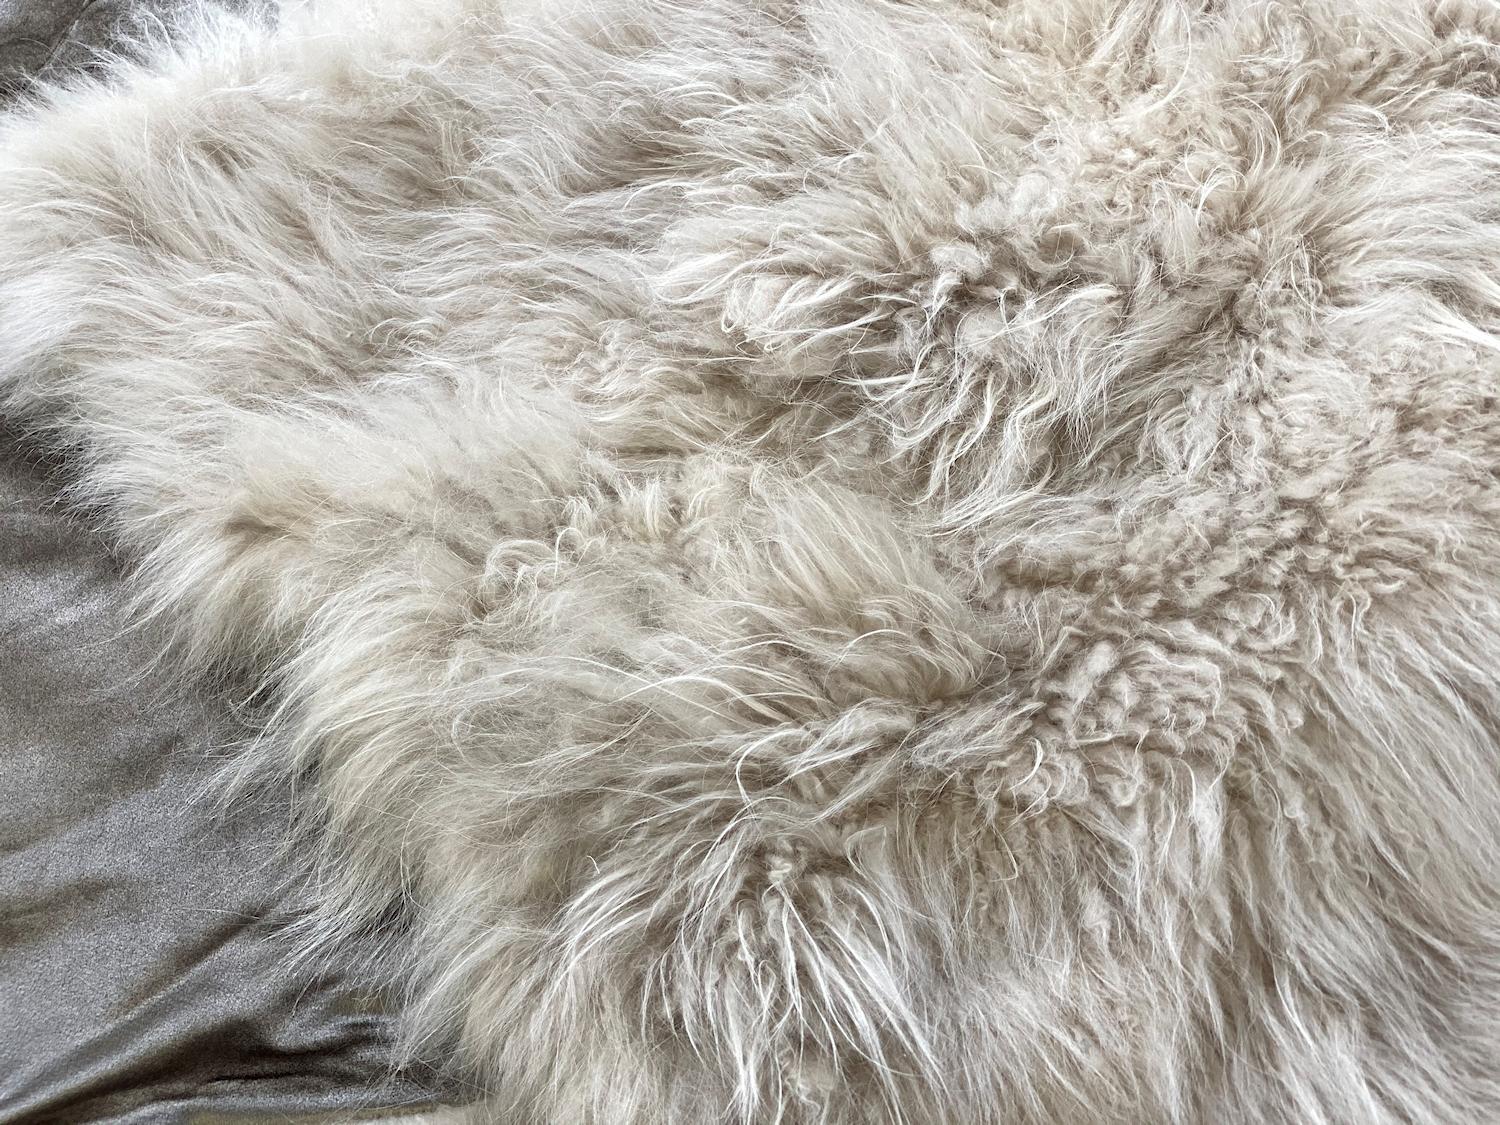 Add luxe to a bedroom by draping this limited edition genuine cashmere fur bed runner over the bed to create a luxurious and opulent room. Supreme in softness and quality, this fur runner will be the pinnacle of luxury that can be styled back with